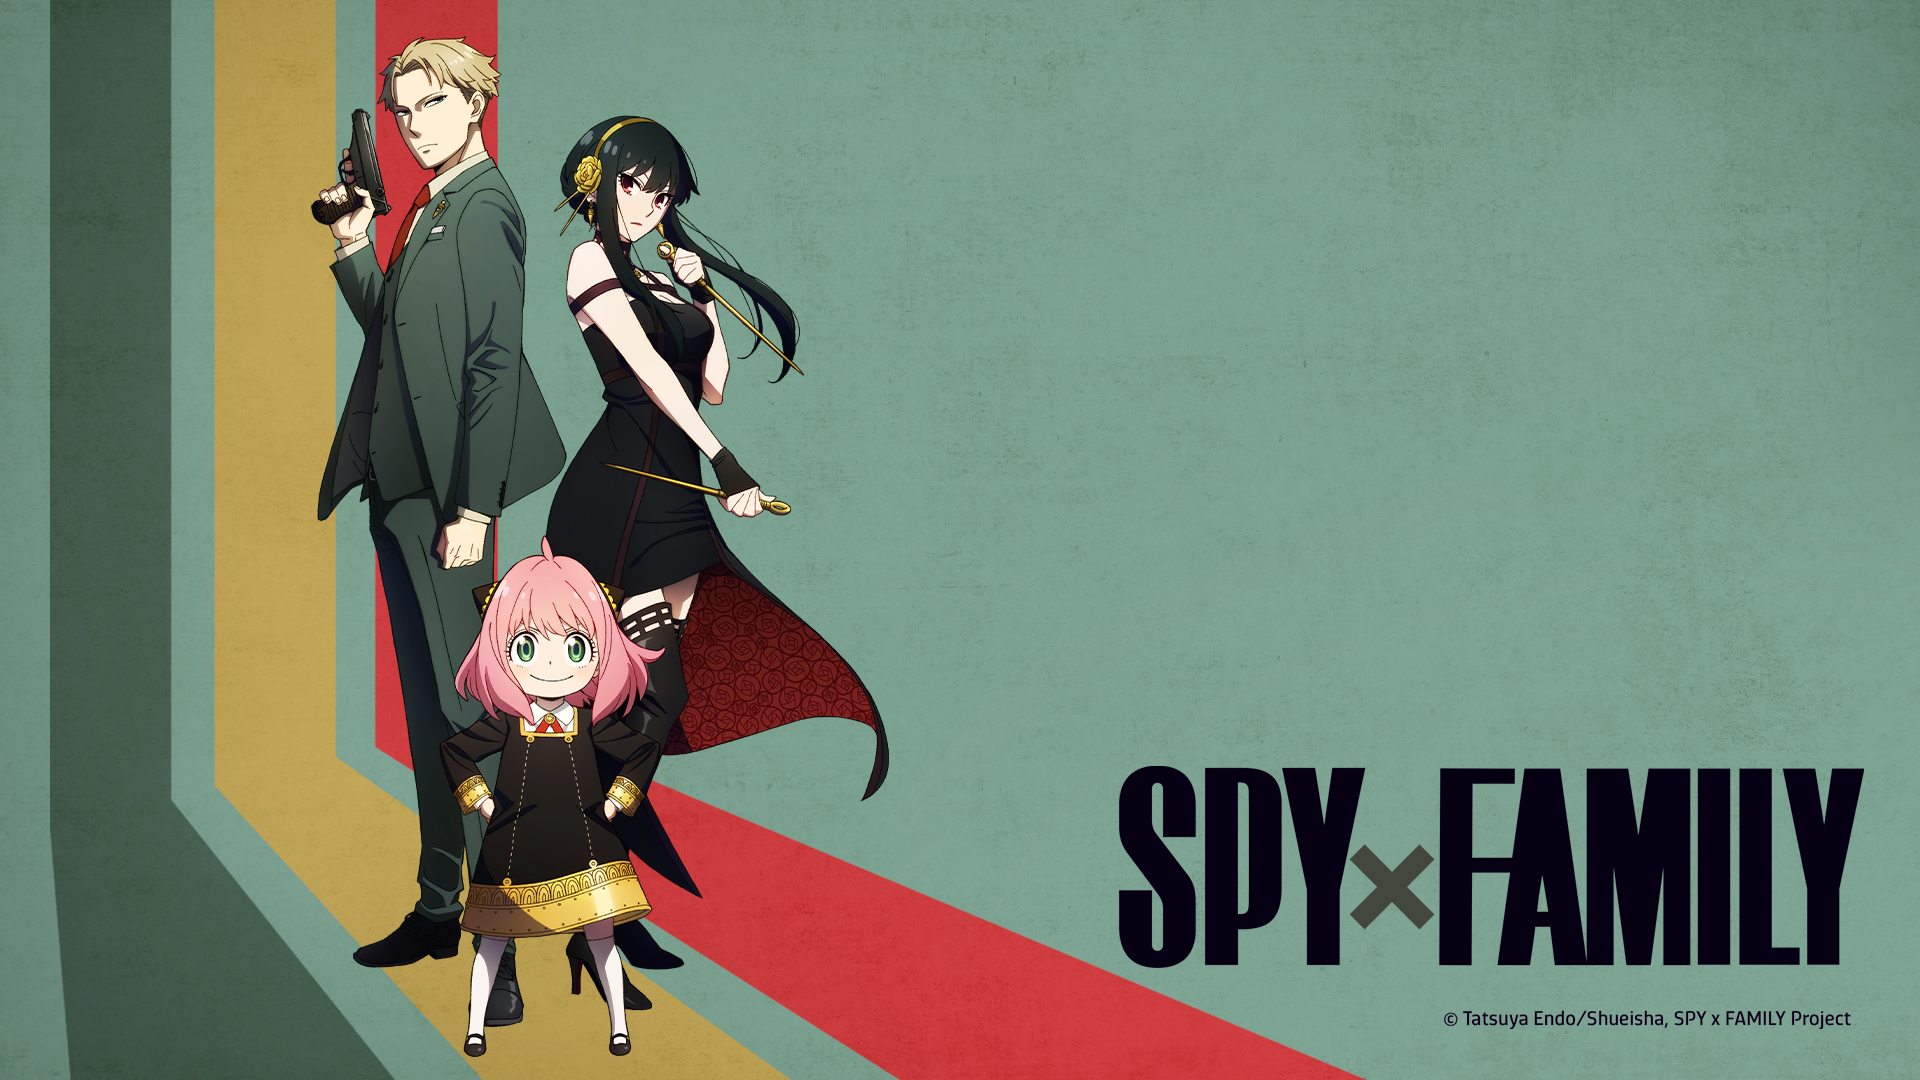 Key art for 'Spy x Family' featuring Loid Forger, Anya Forger, and Yor Forger against a green background. The show's logo is on the right side.